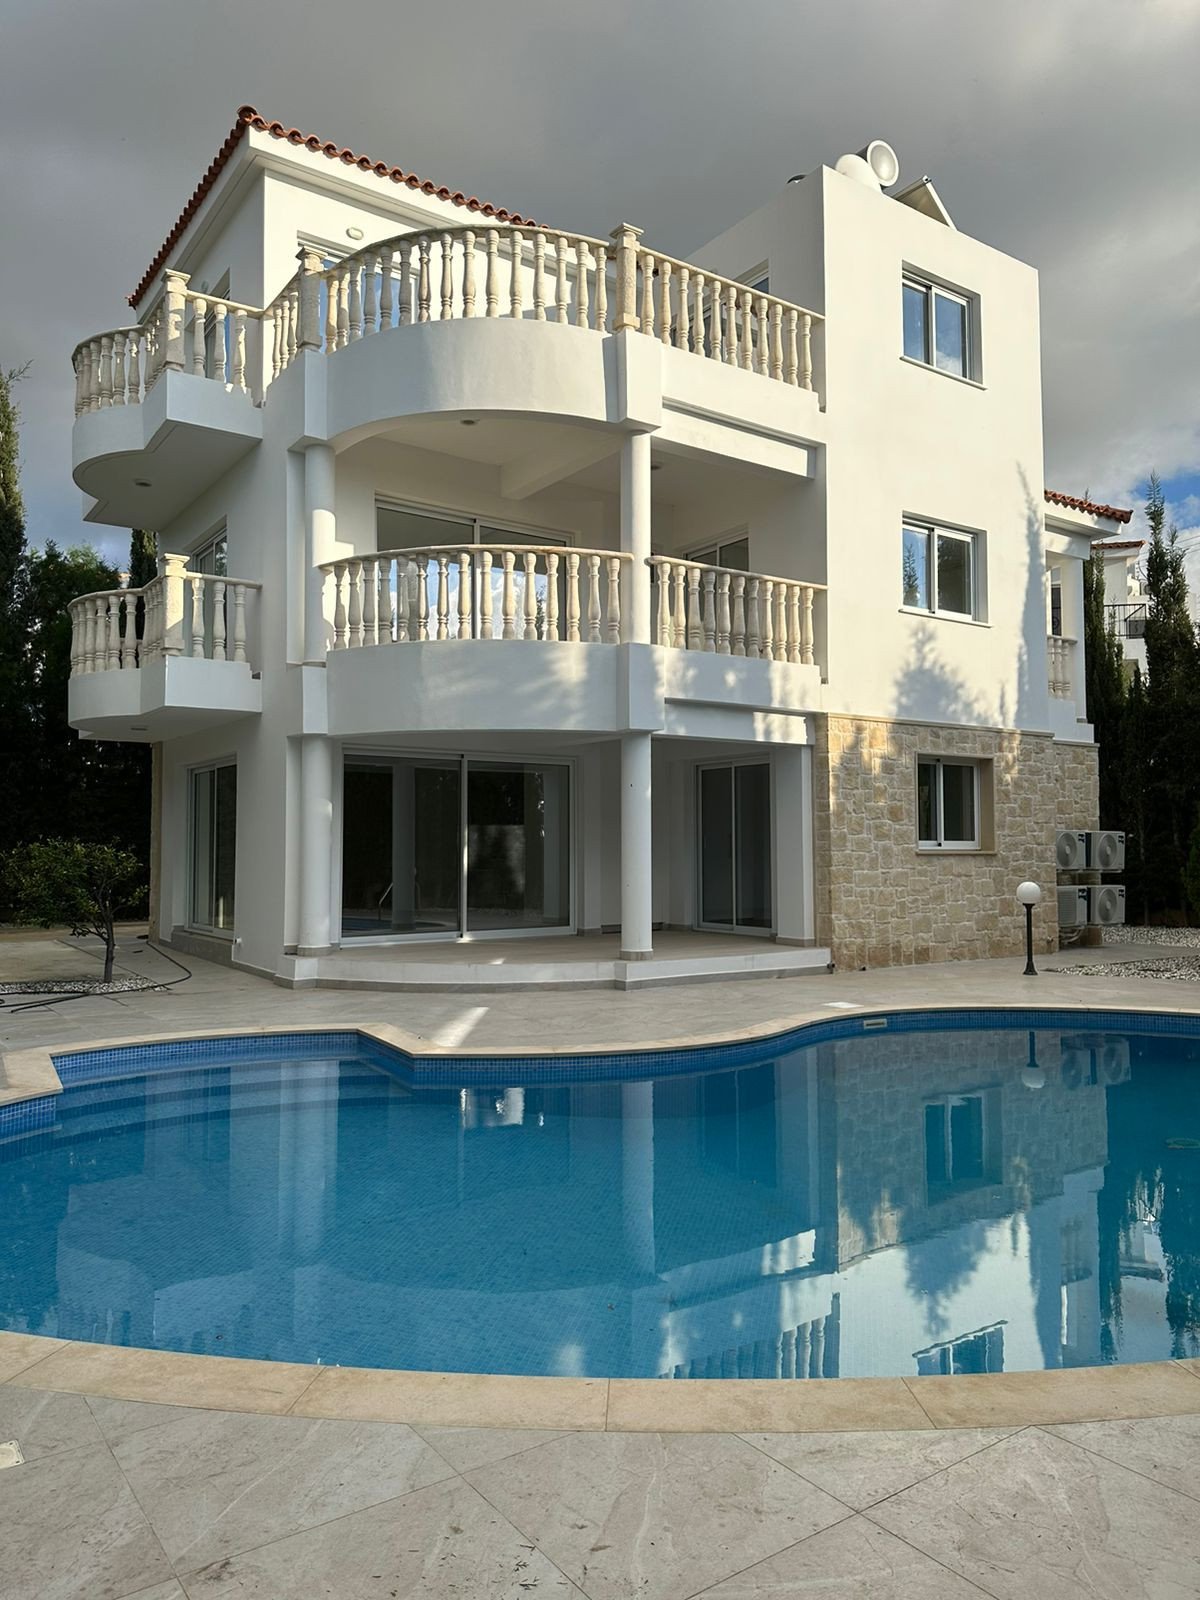 Property for Sale: House (Detached) in Saint Georges, Paphos  | Key Realtor Cyprus